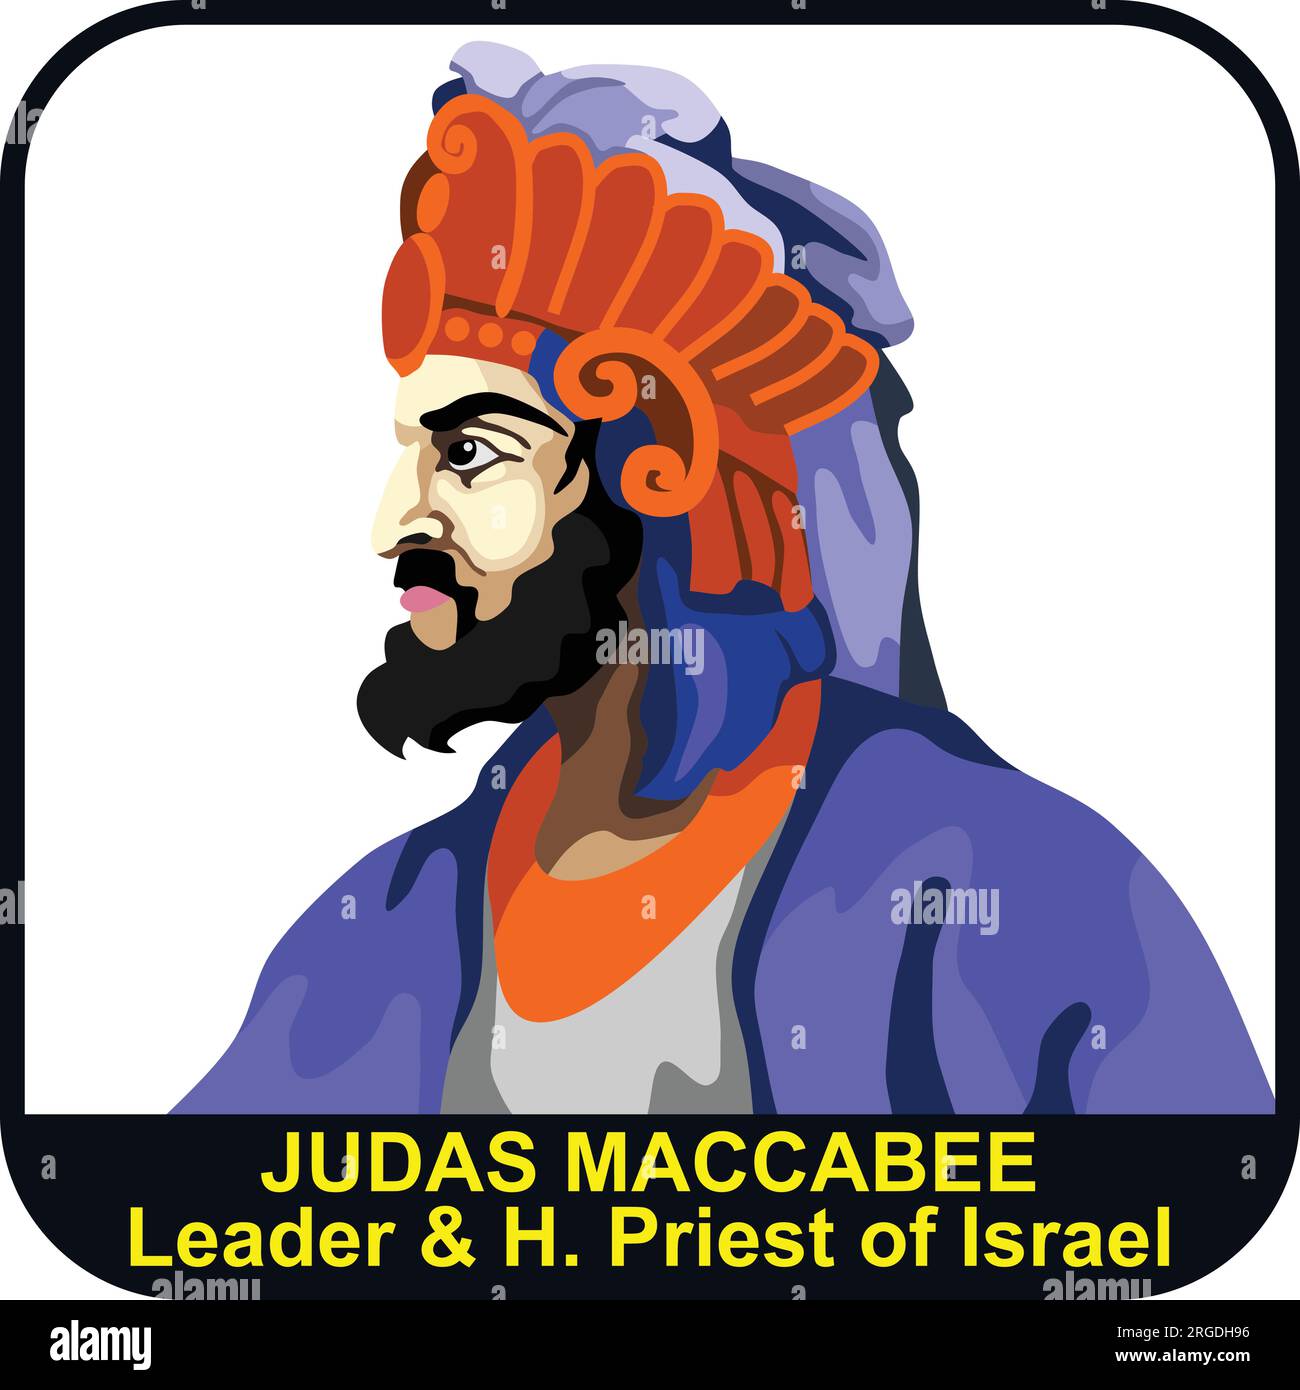 Judas Maccabee 2nd Leader of Israel Maccabee & 45th High Priest of Israel Stock Vector